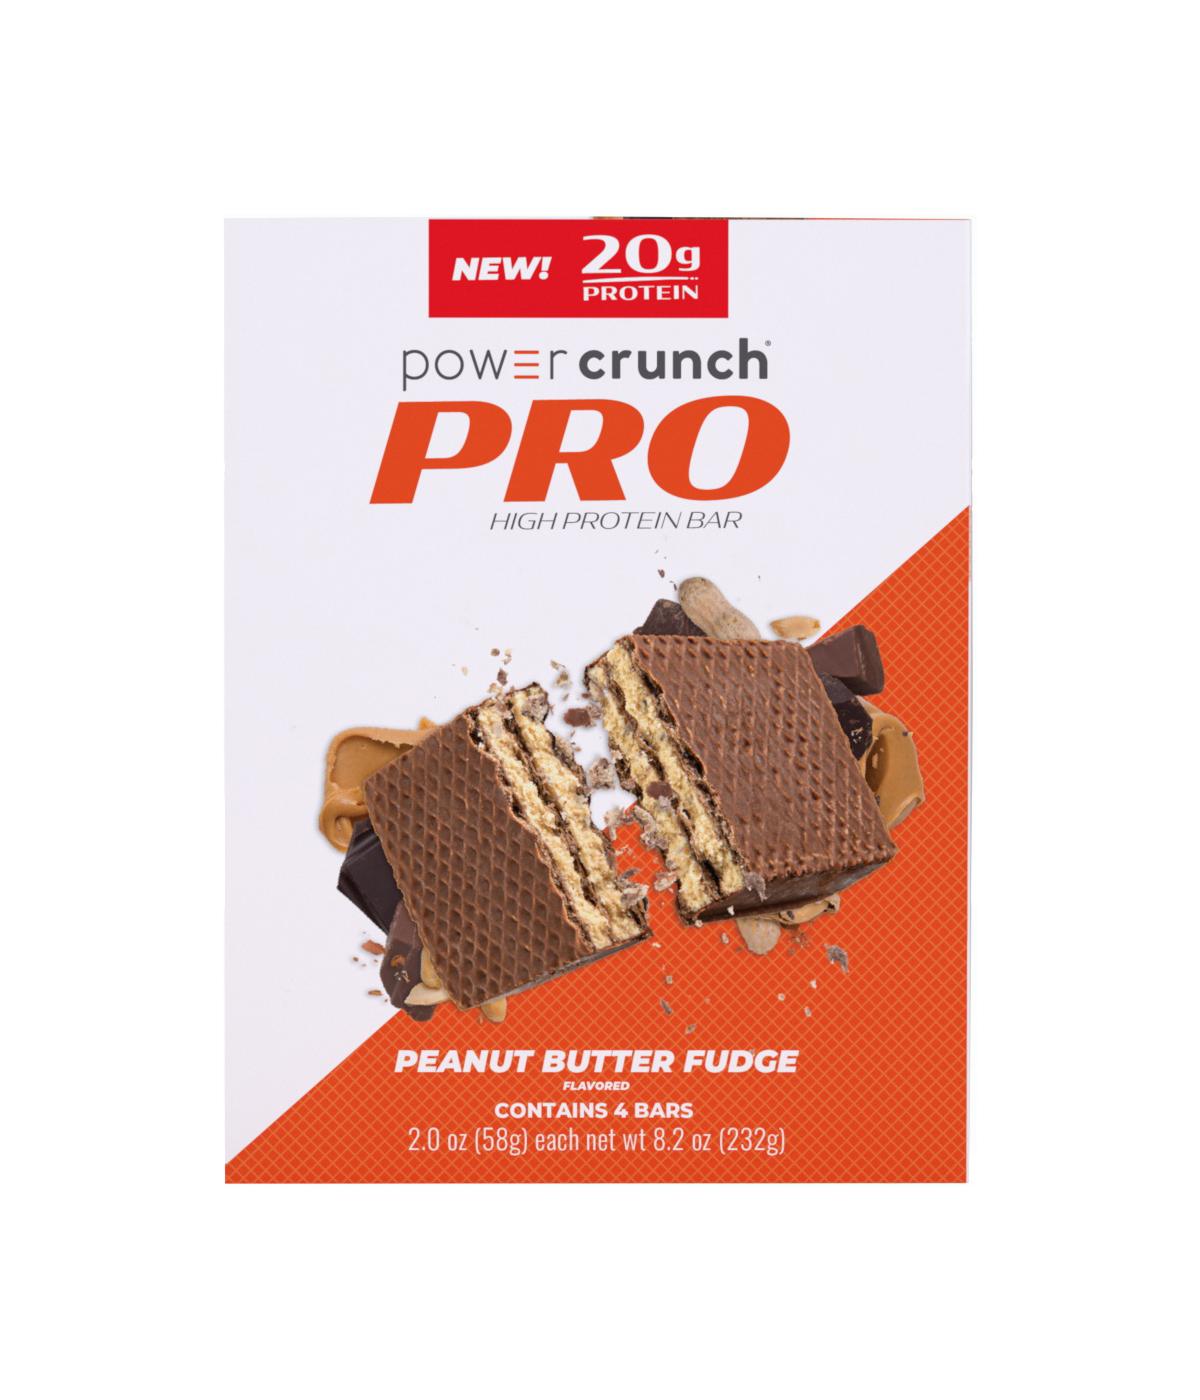 Power Crunch Pro 20g Protein Bars - Peanut Butter Fudge; image 1 of 2